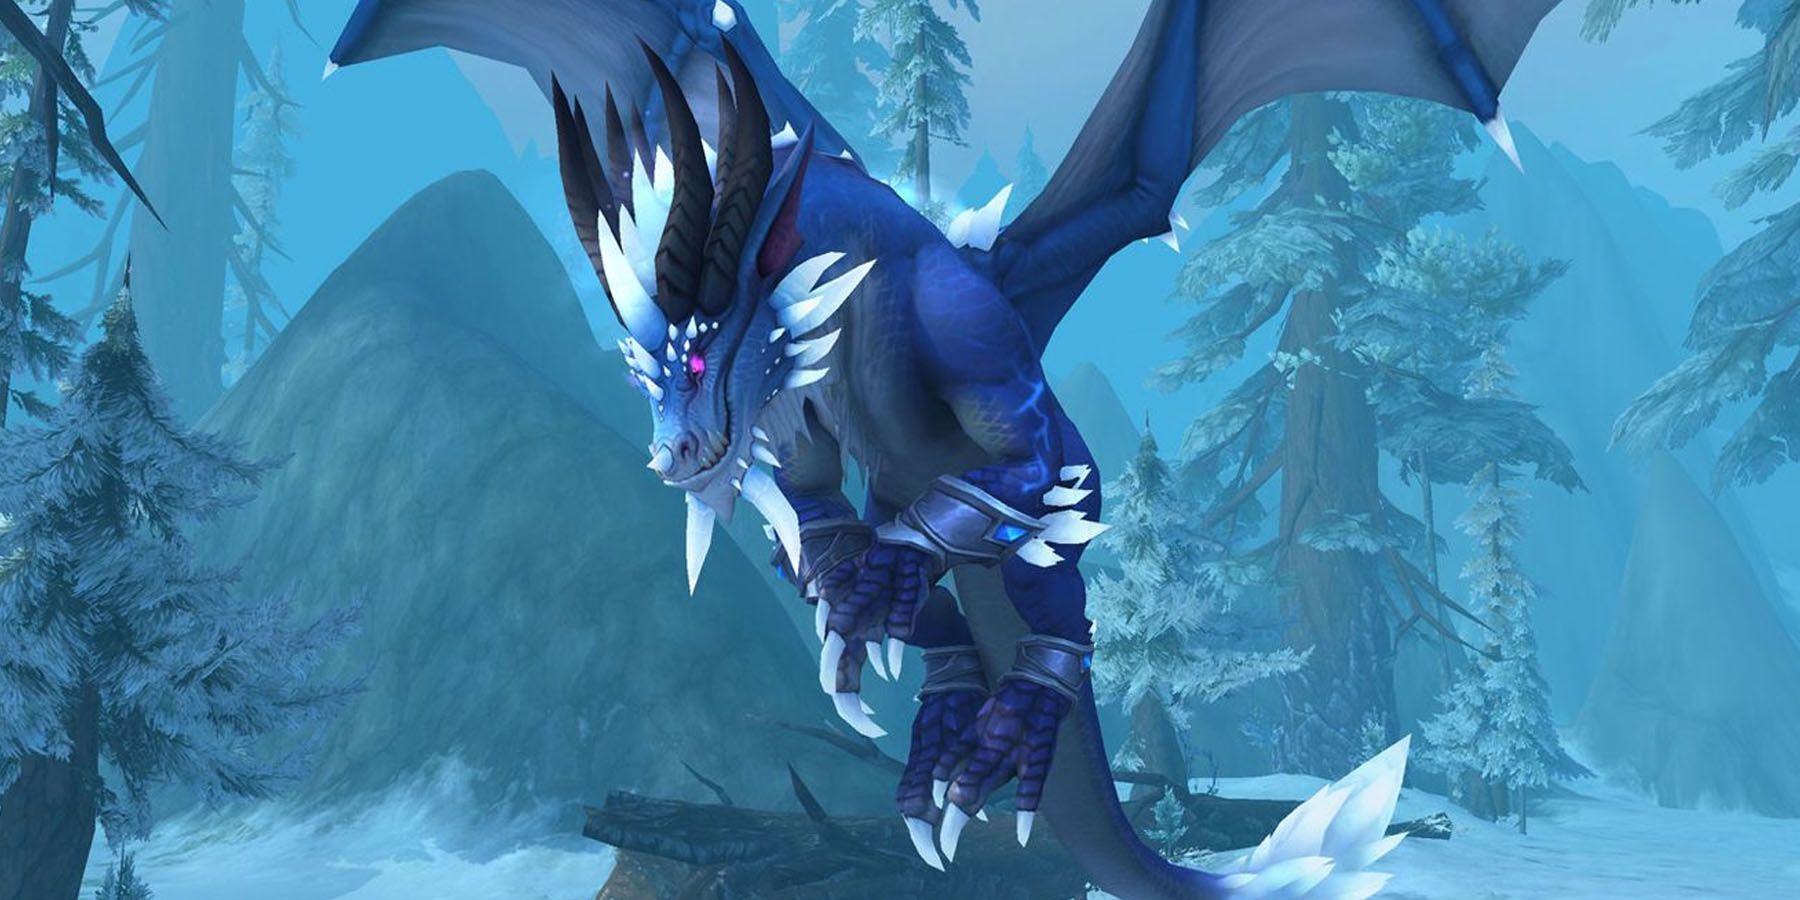 A member of the Blue Dragonflight